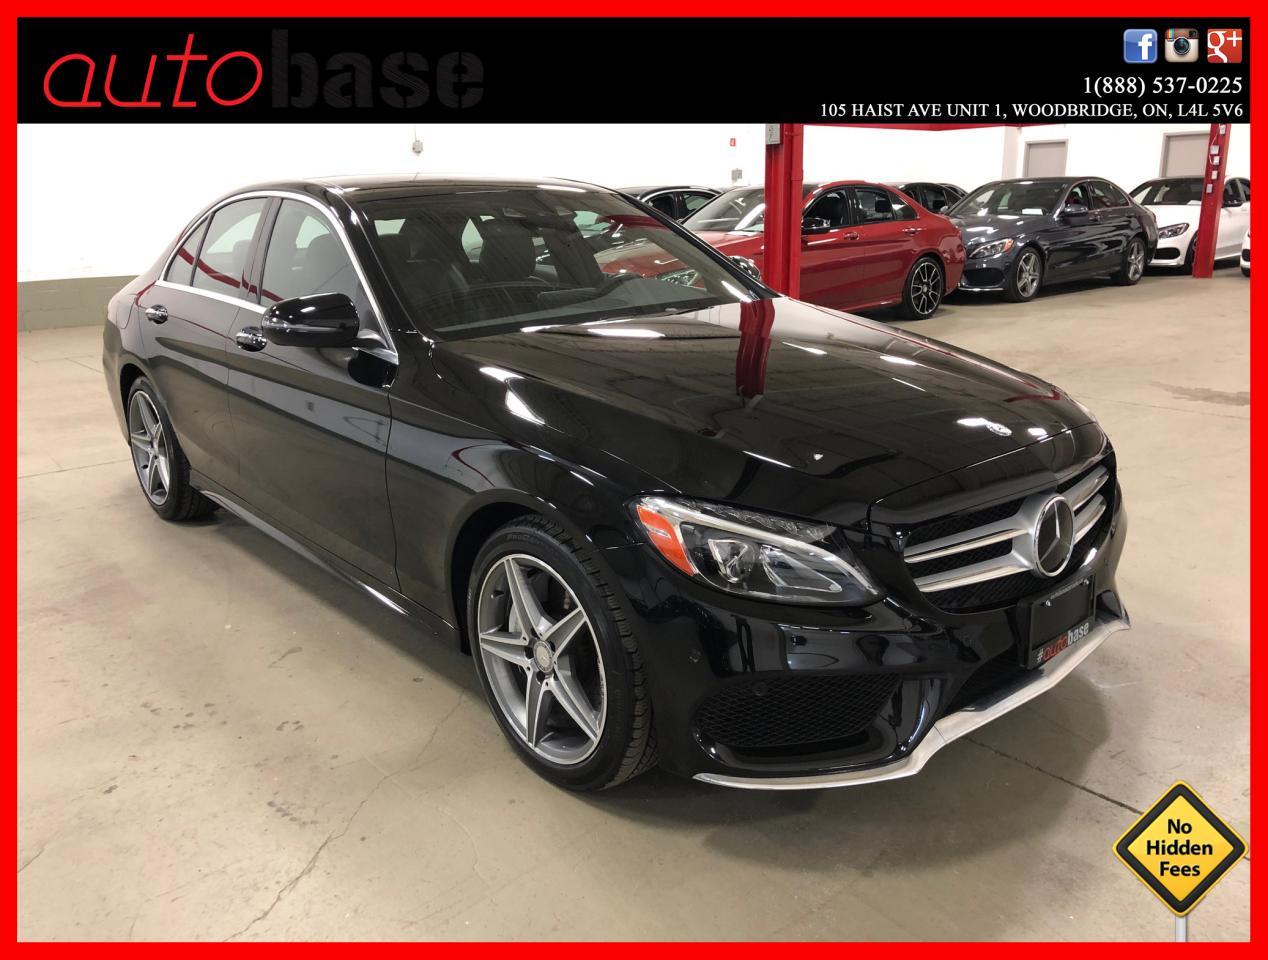 Used 2016 Mercedes Benz C Class C300 4matic Distronic